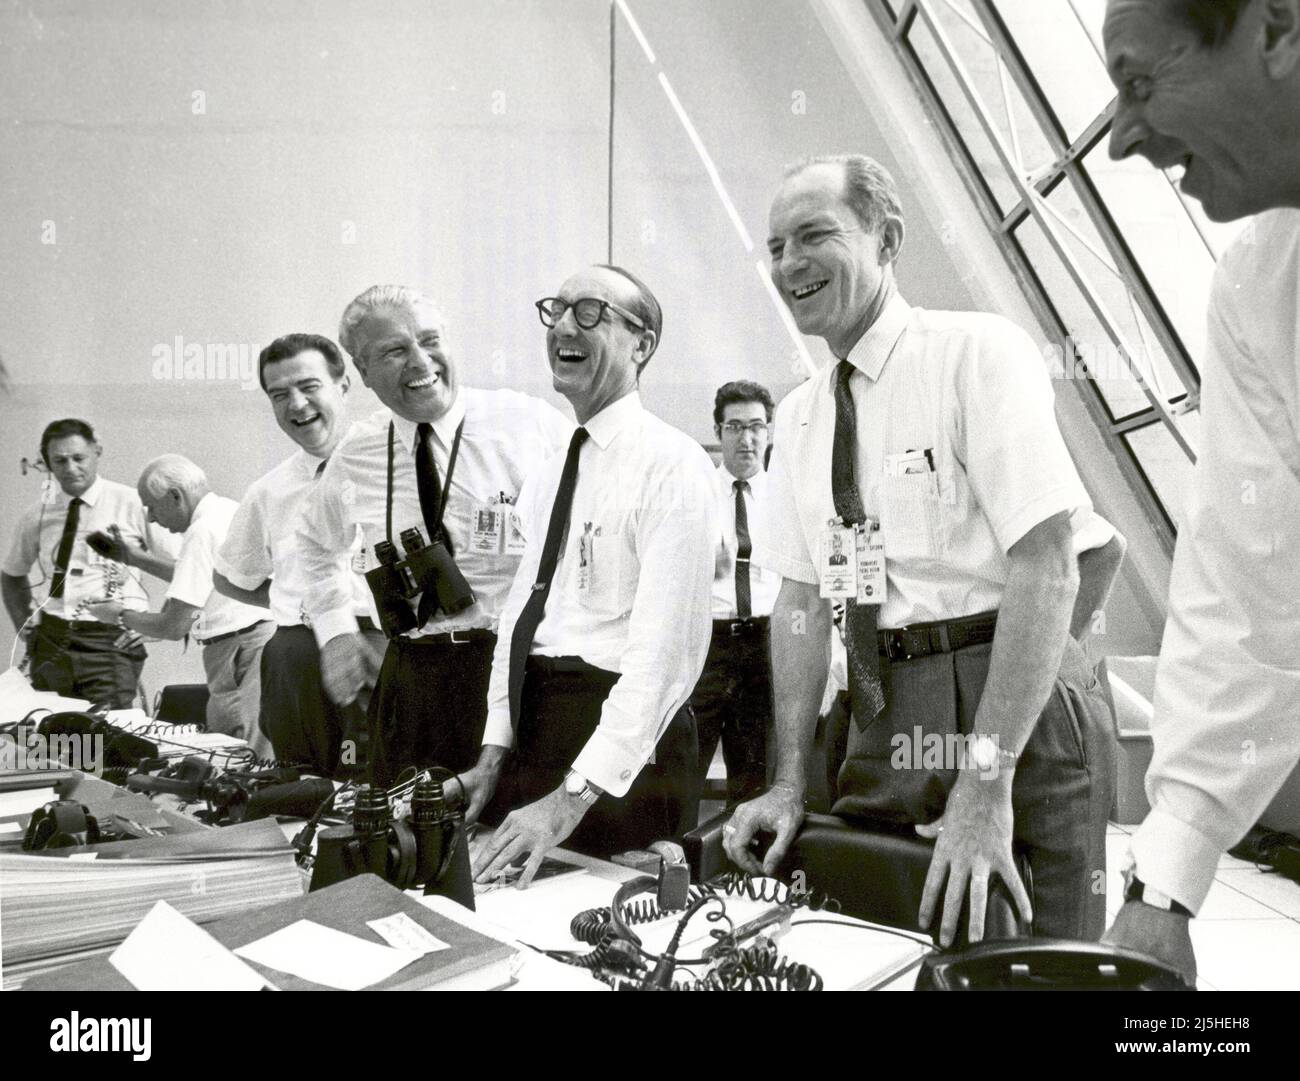 Apollo 11 mission officials relax in the Launch Control Center following the successful Apollo 11 liftoff on July 16, 1969. From left to right are: Charles W. Mathews, Deputy Associate Administrator for Manned Space Flight; Dr. Wernher von Braun, Director of the Marshall Space Flight Center; George Mueller, Associate Administrator for the Office of Manned Space Flight; Lt. Gen. Samuel C. Phillips, Director of the Apollo Program Stock Photo